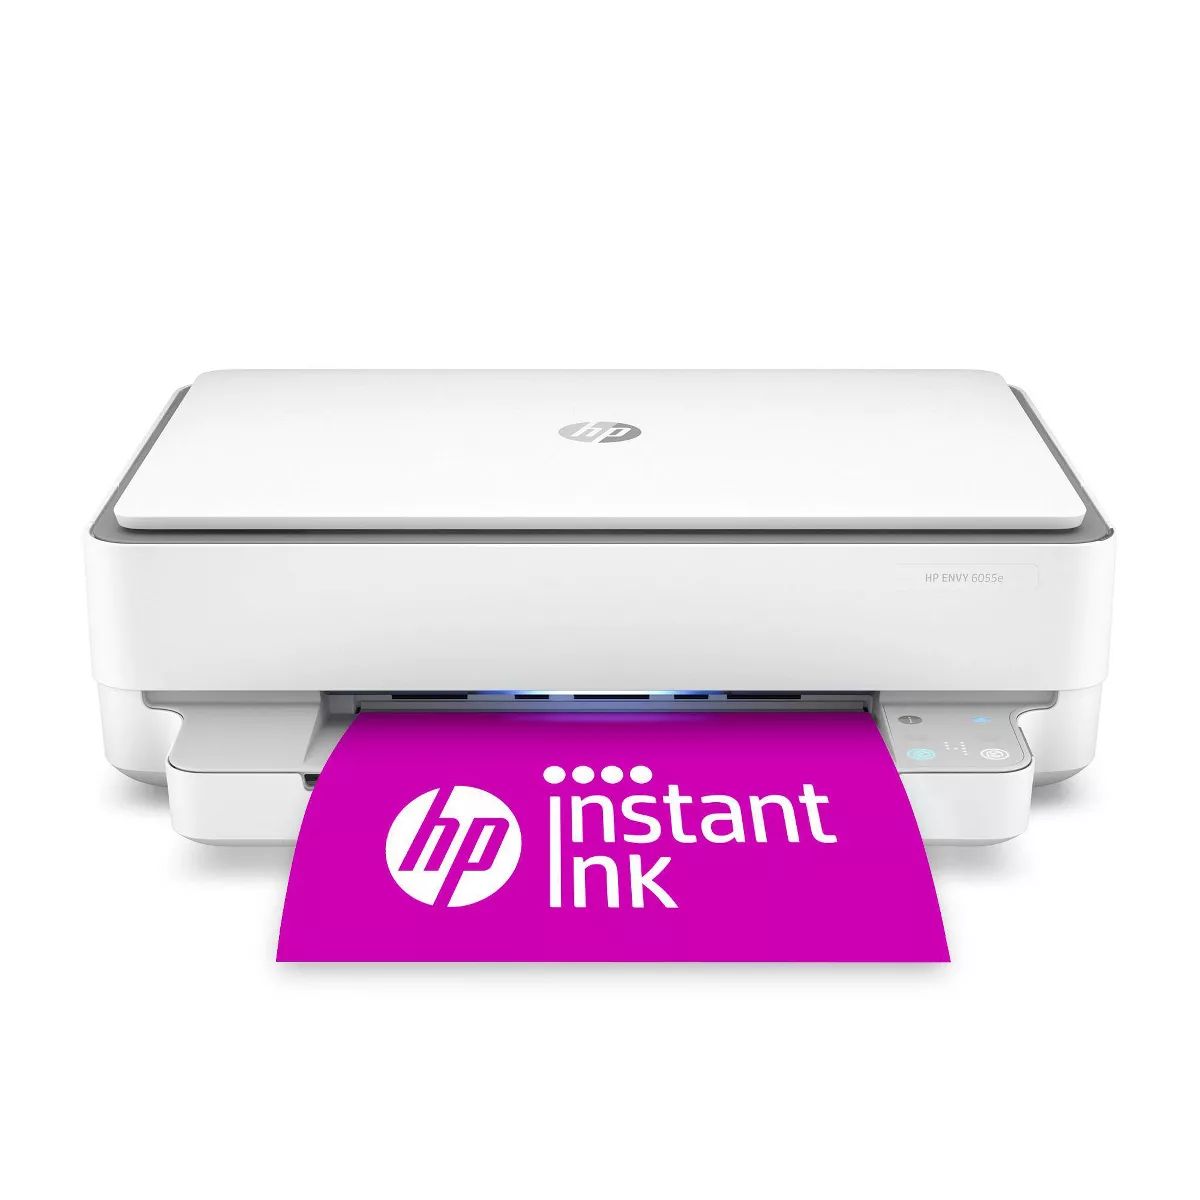 HP ENVY 6055e Wireless All-In-One Color Printer, Scanner, Copier with Instant Ink and HP+ (223N1A... | Target